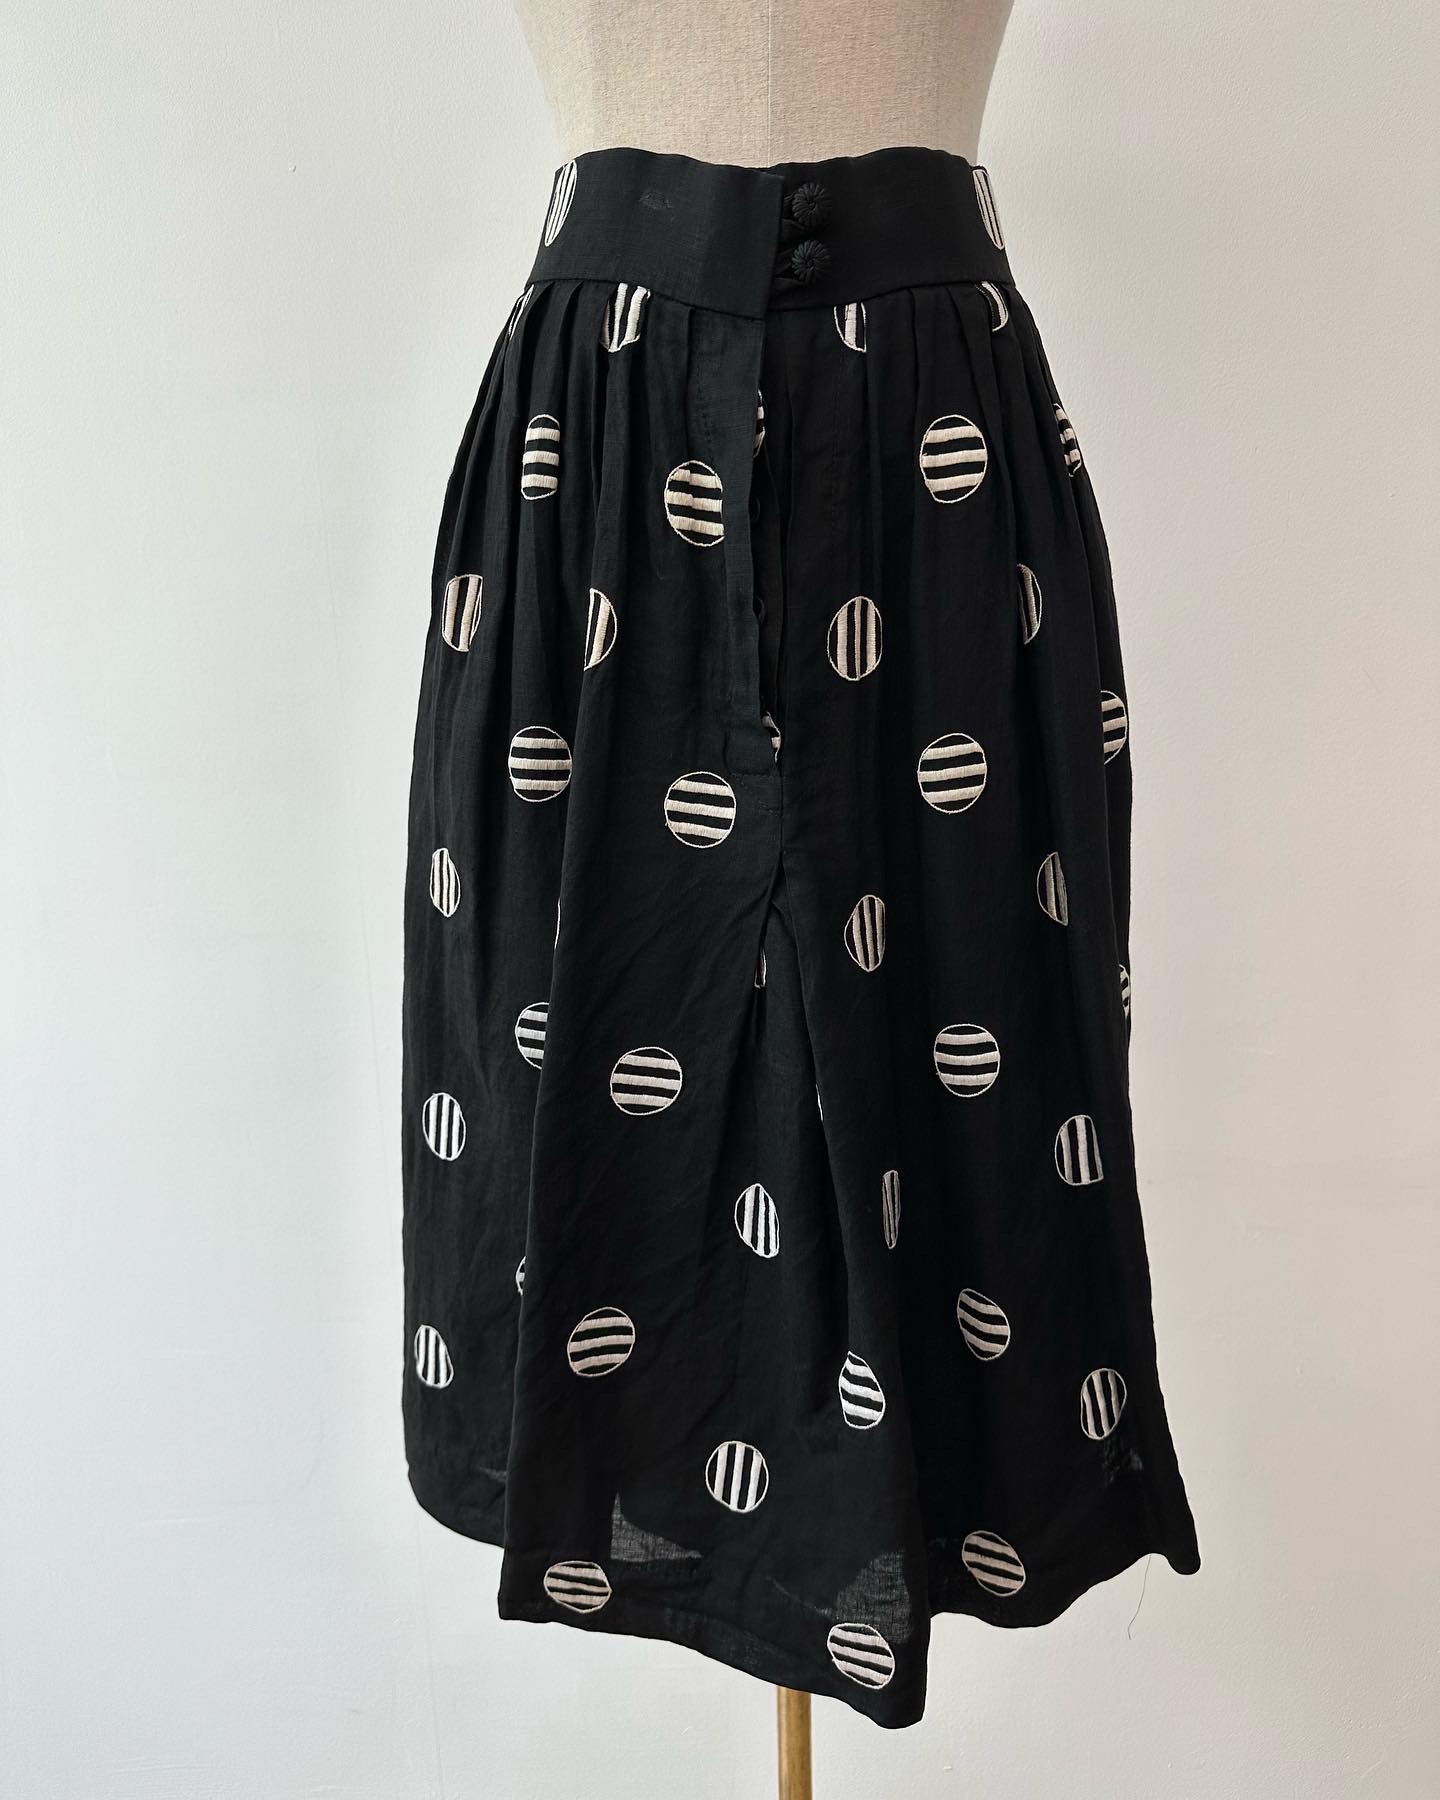 Strip dot embroidered linen skirt (made in England)